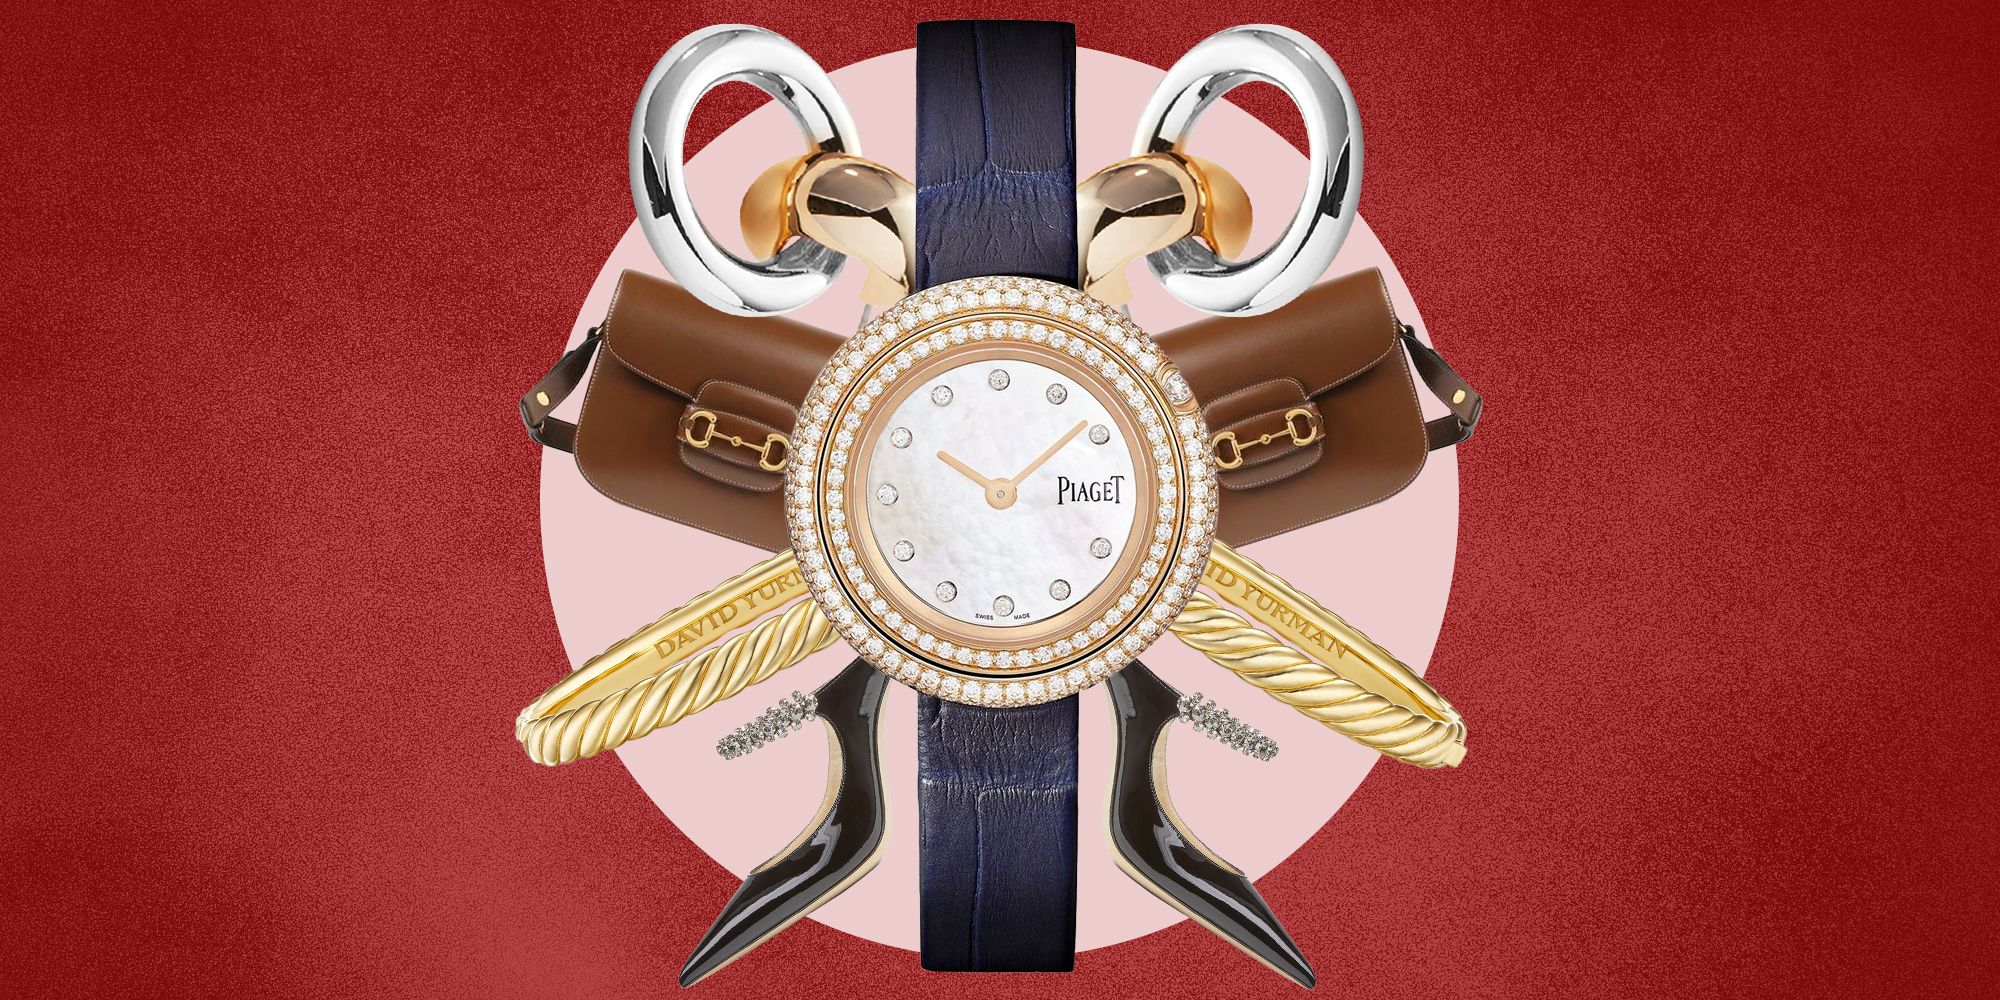 When only the best will do, gift her a timeless piece from